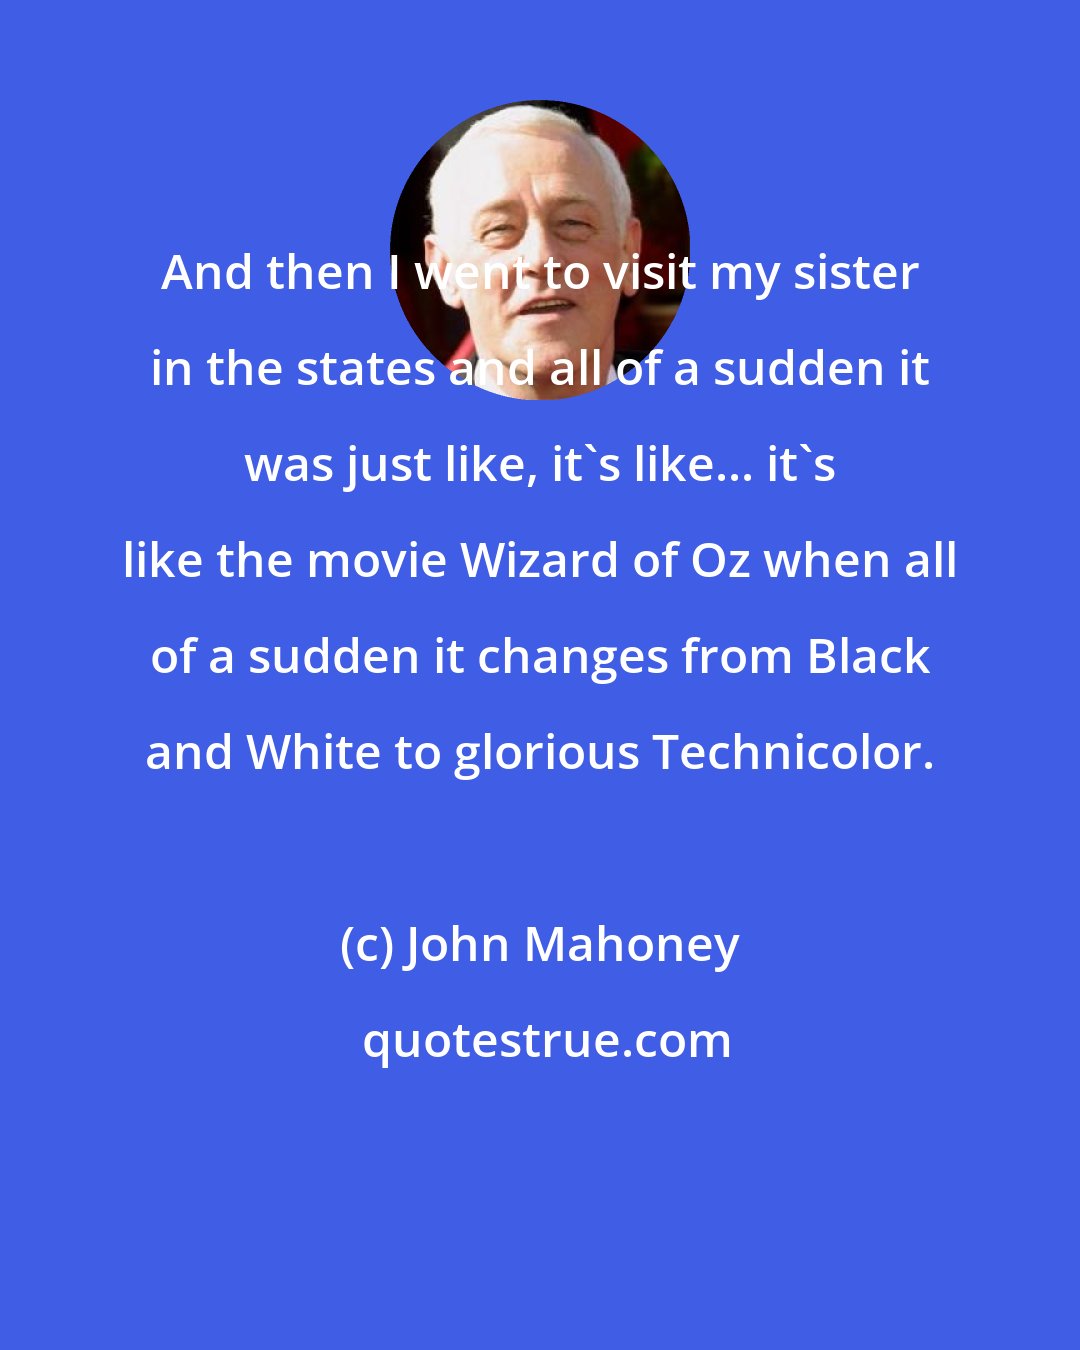 John Mahoney: And then I went to visit my sister in the states and all of a sudden it was just like, it's like... it's like the movie Wizard of Oz when all of a sudden it changes from Black and White to glorious Technicolor.